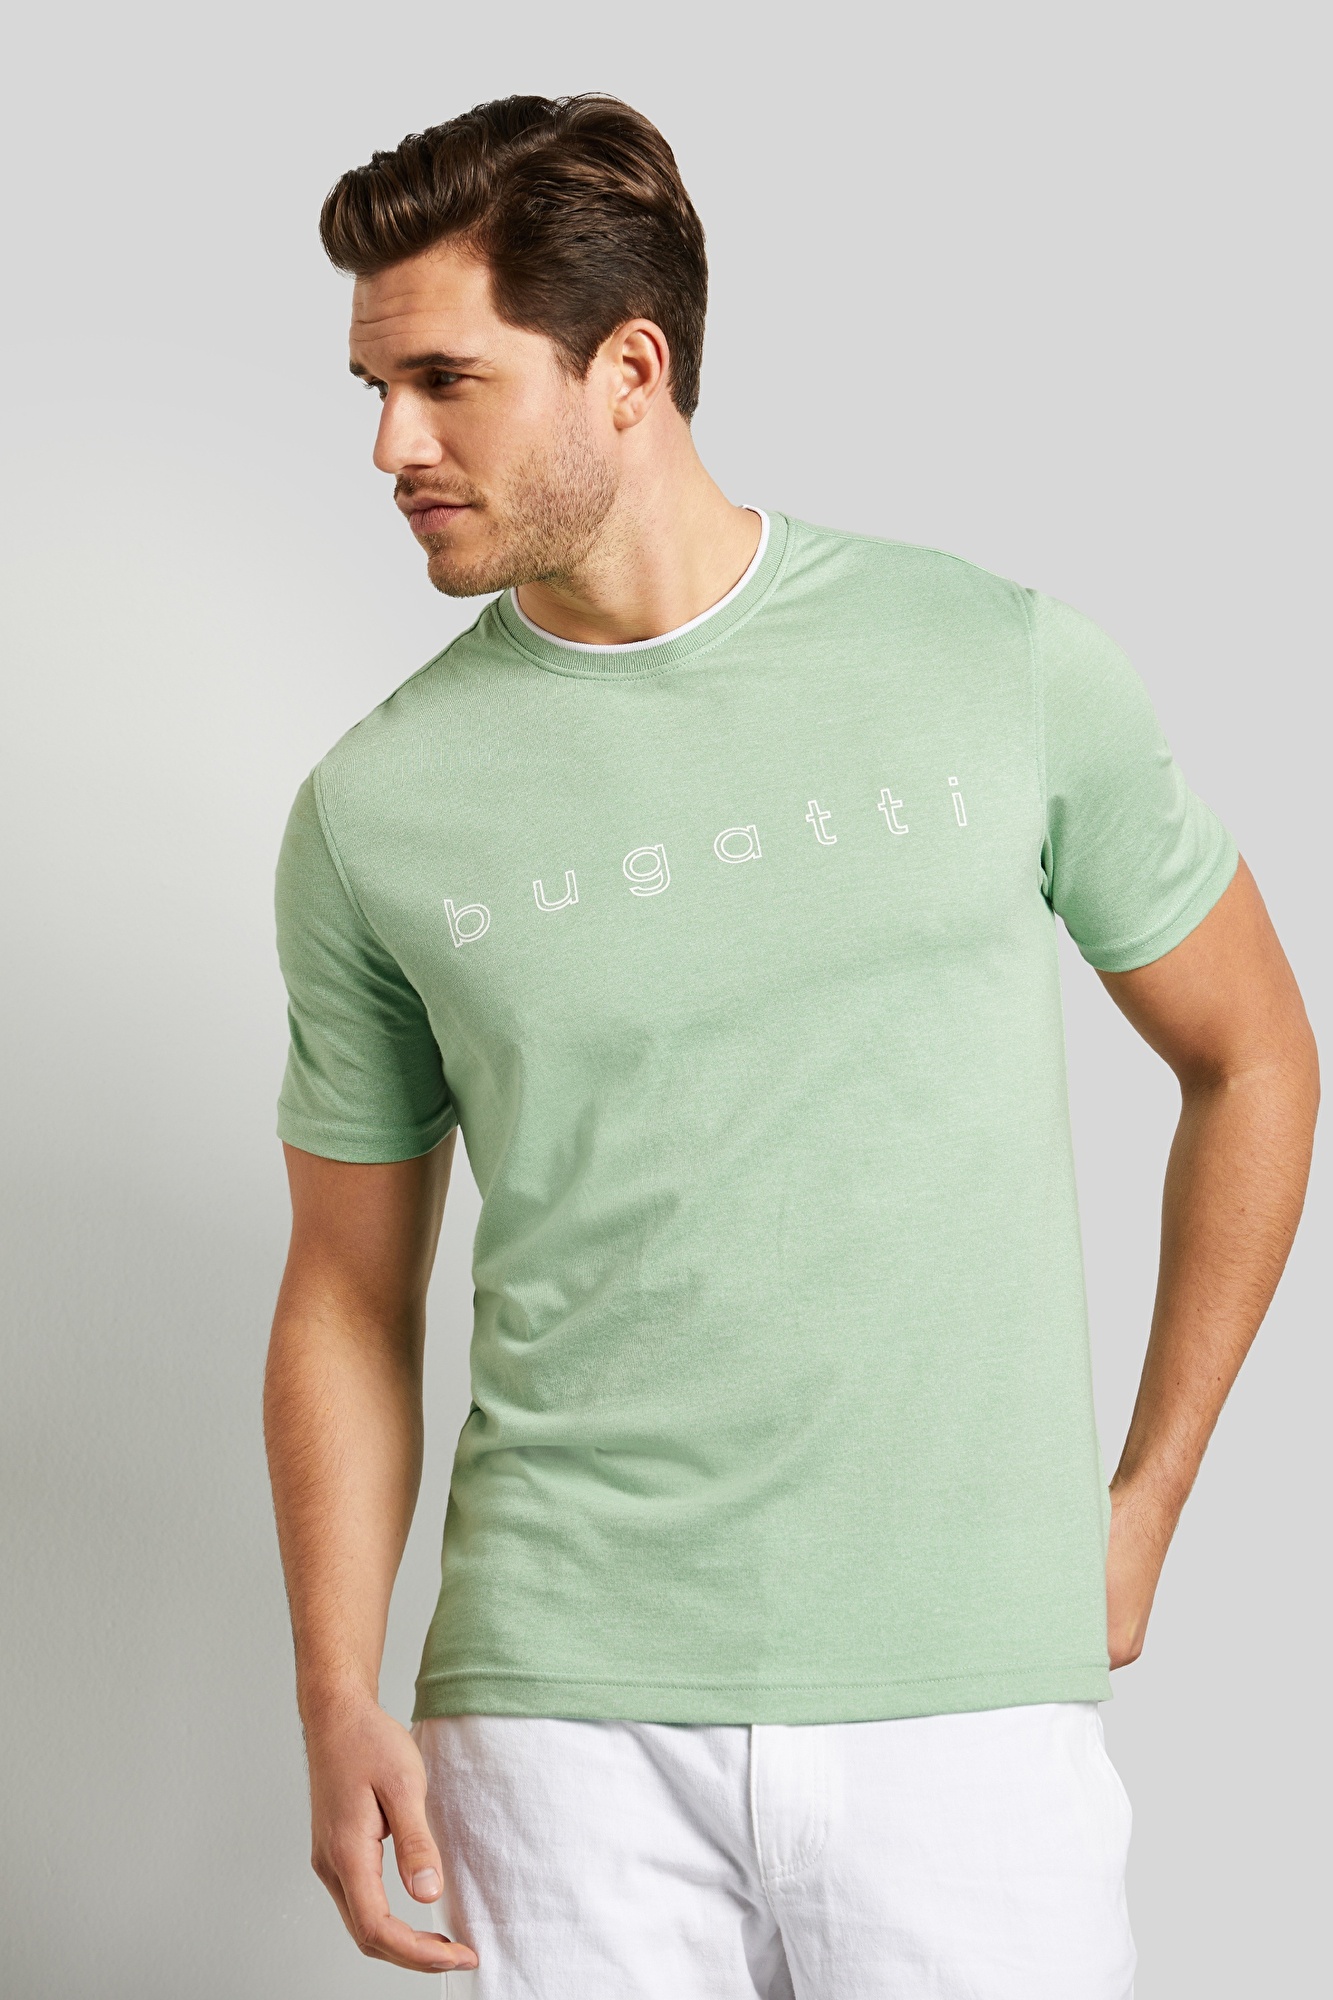 T-shirt with stylish contrasting stripes along the collar in mint | bugatti